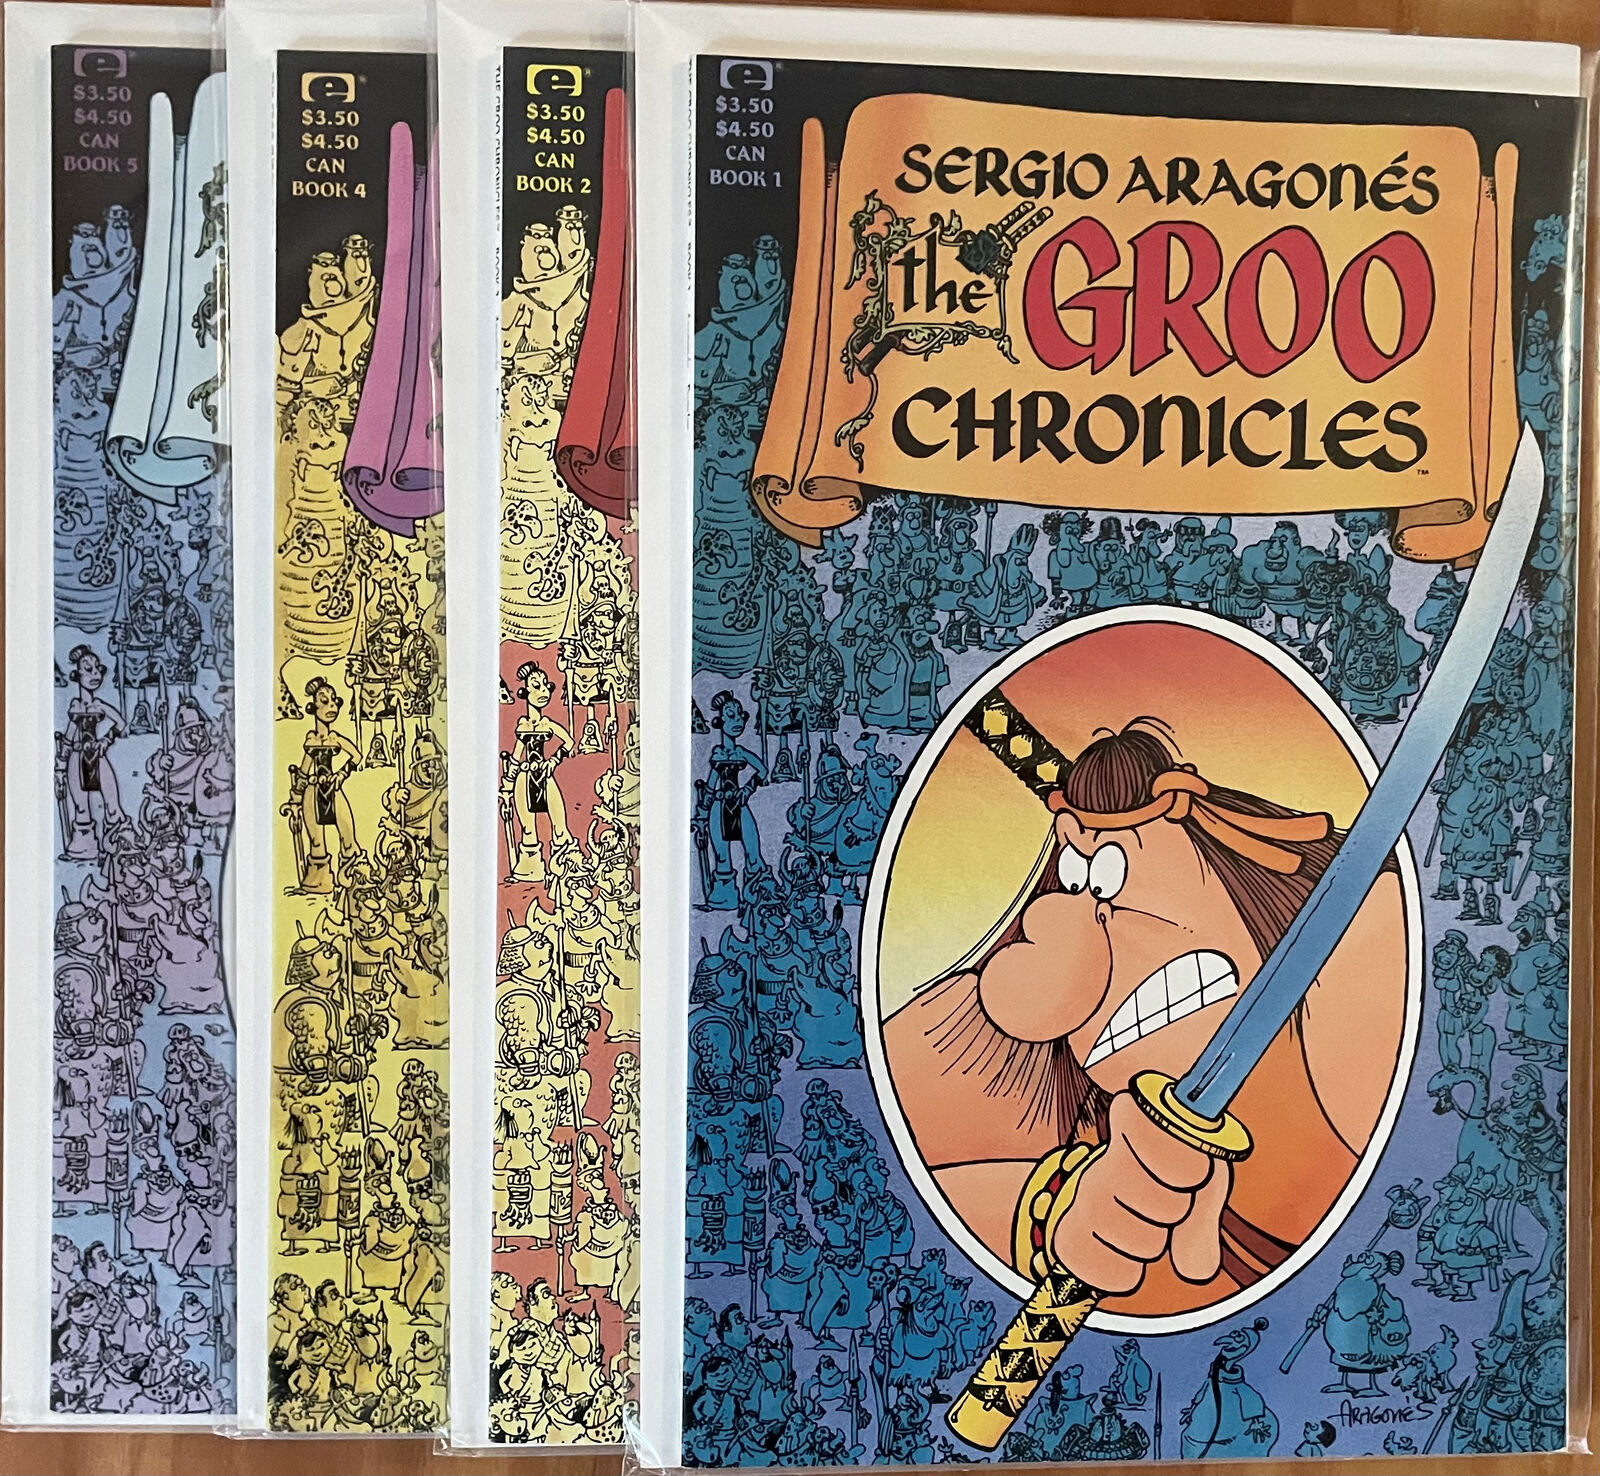 The Groo Chronicles #1, 2, 4, 5, each book at least NM, Marvel Epic Comics, 1989